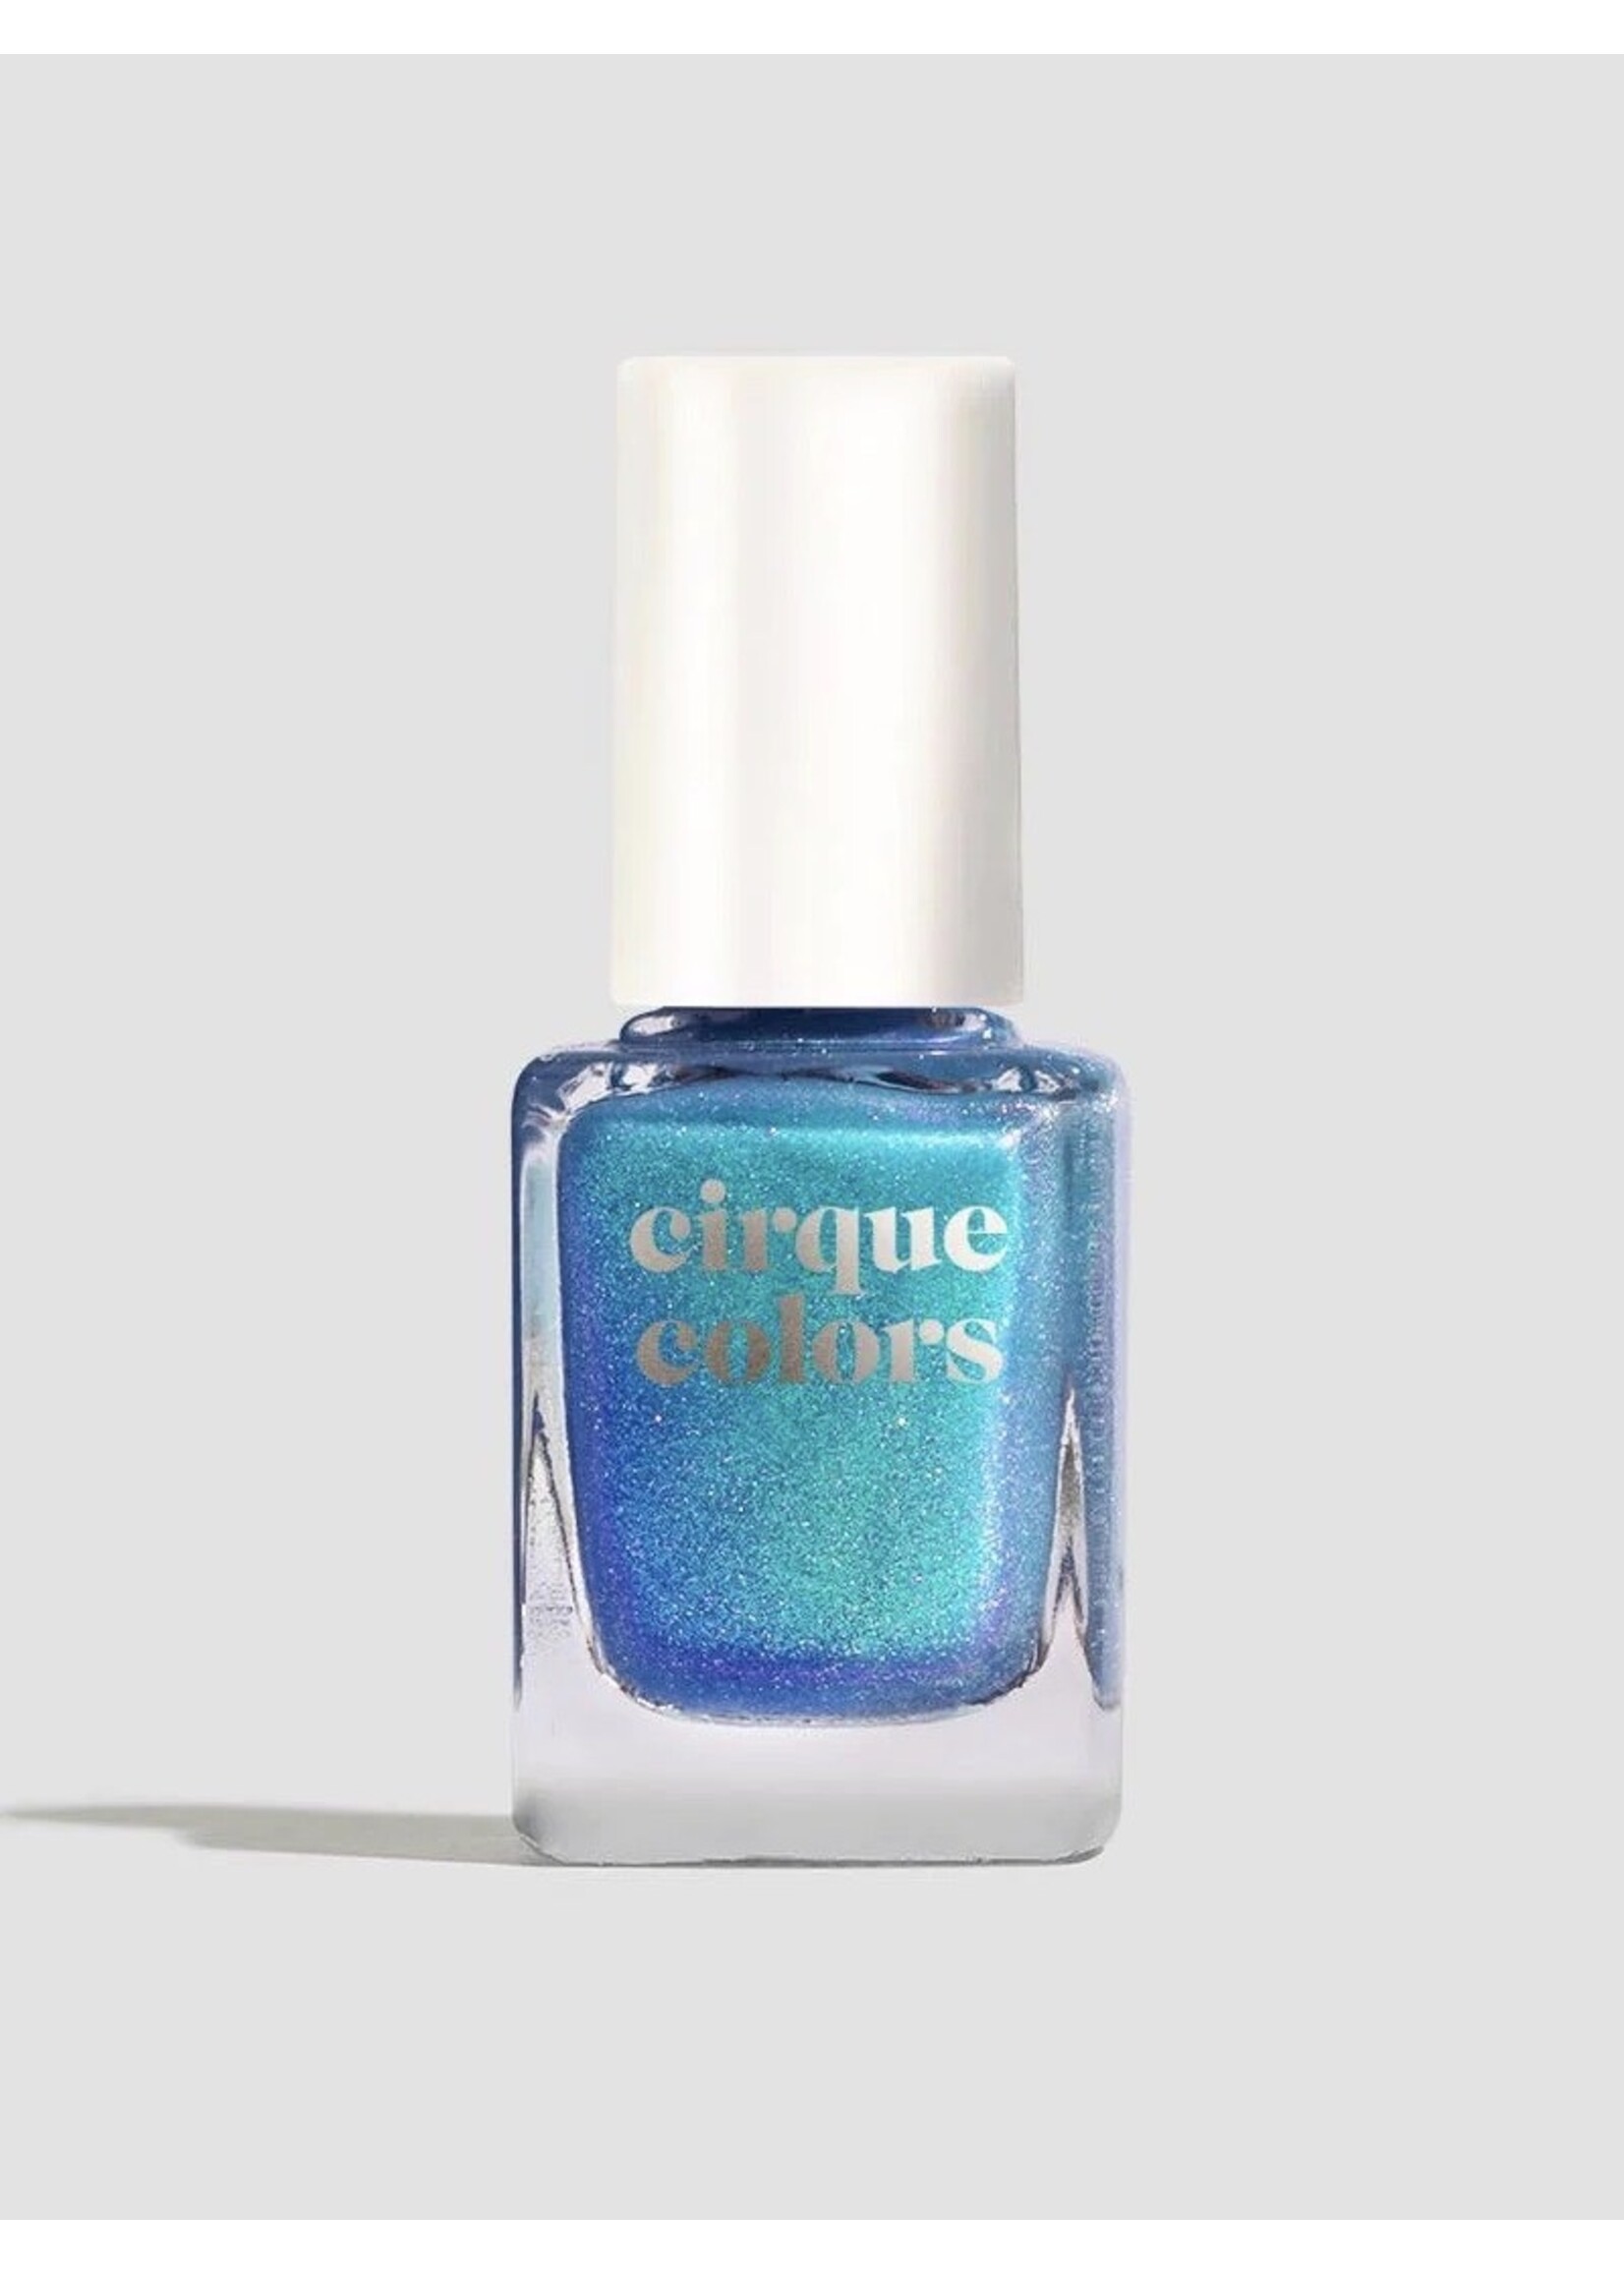 Cirque Colors Nail polishes "Surfer's Crush" by Cirque Colors